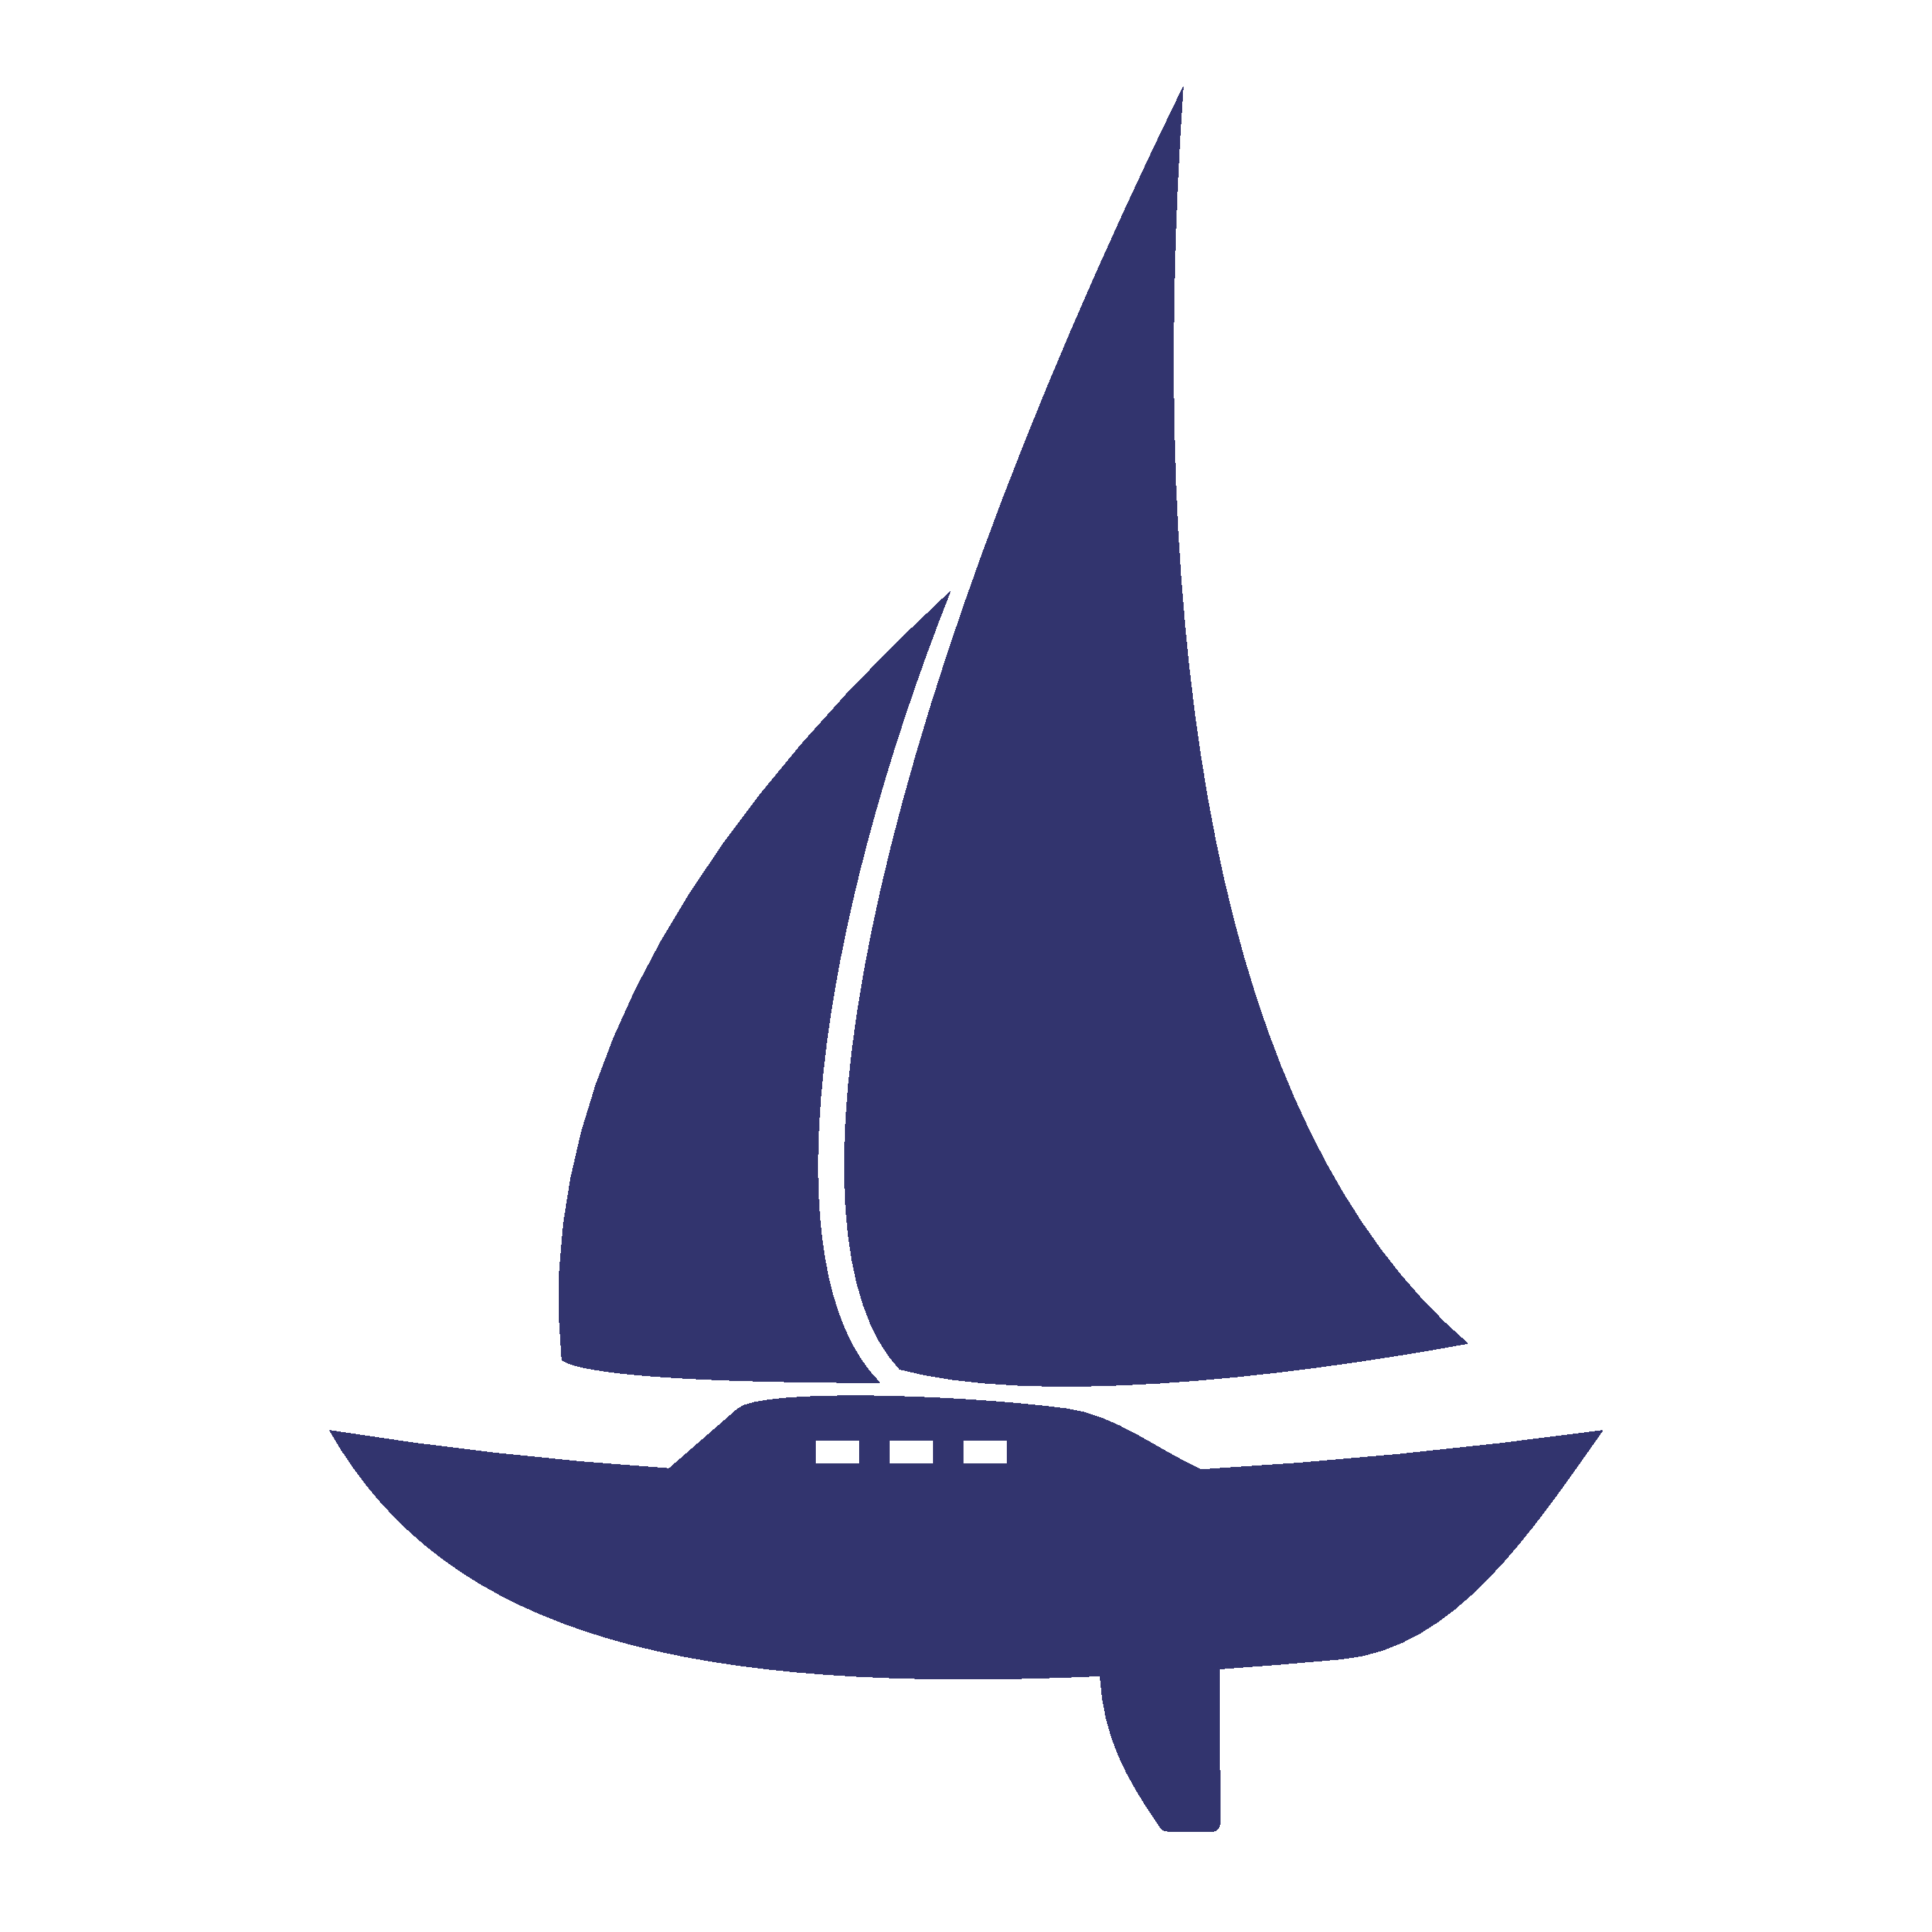 Sailing Boat Insurance from Visicover